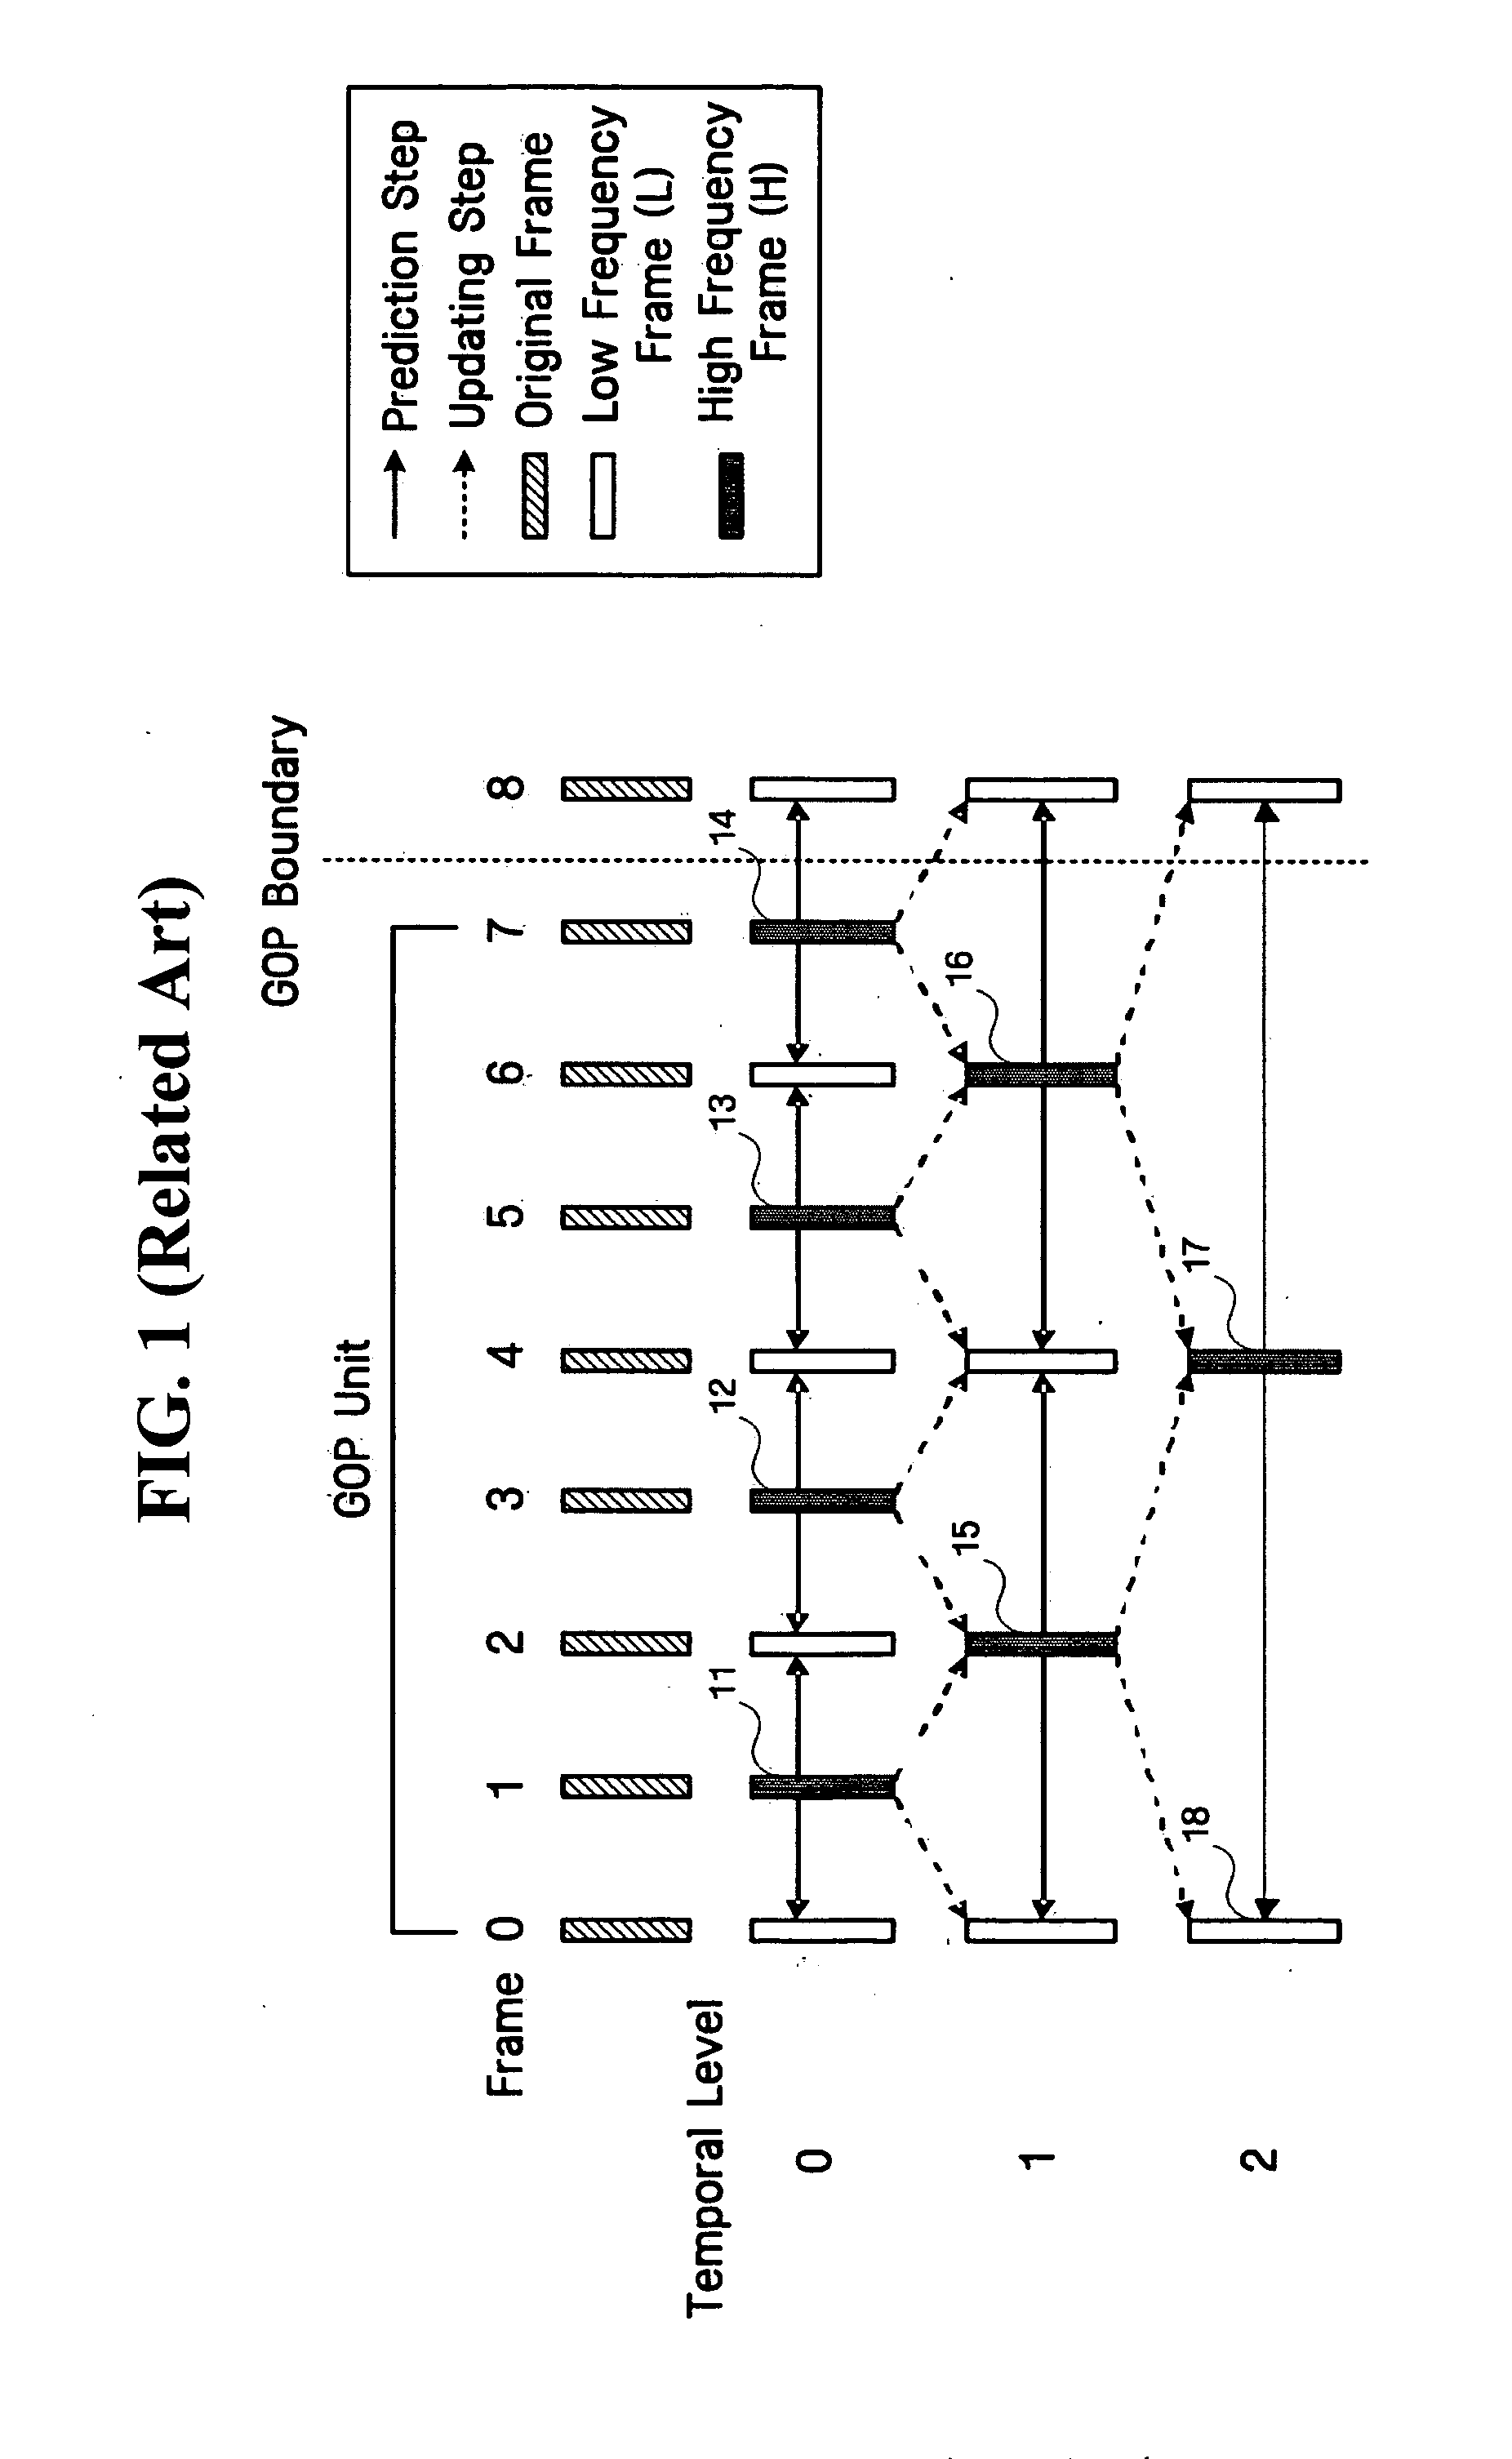 Video encoding/decoding method and apparatus using motion prediction between temporal levels